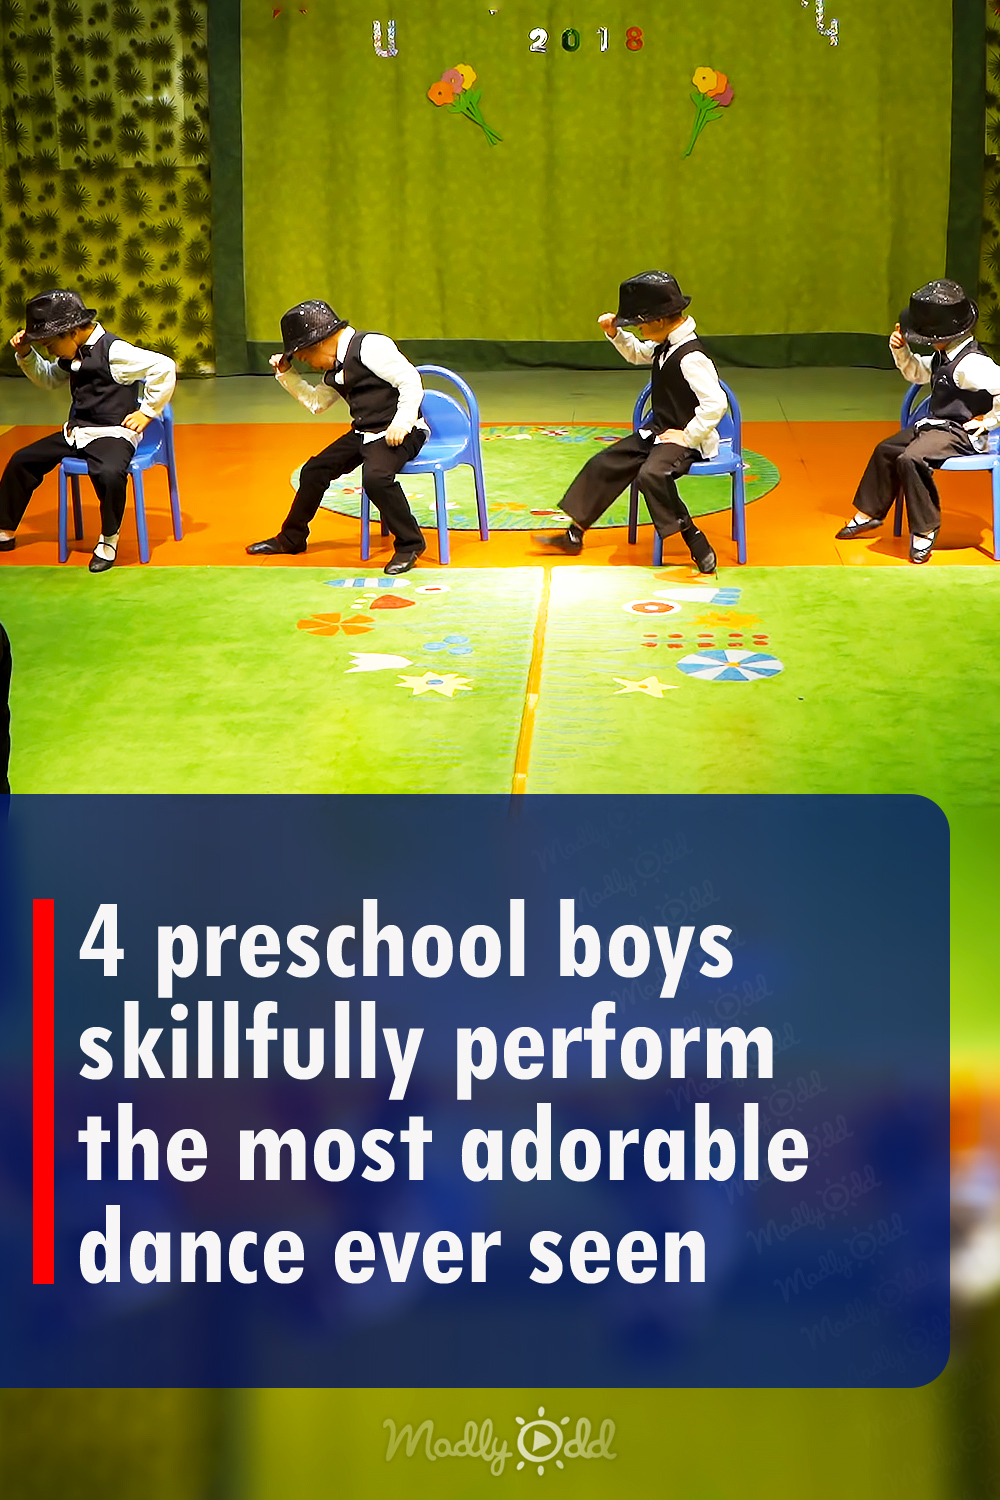 4 preschool boys skillfully perform the most adorable dance ever seen